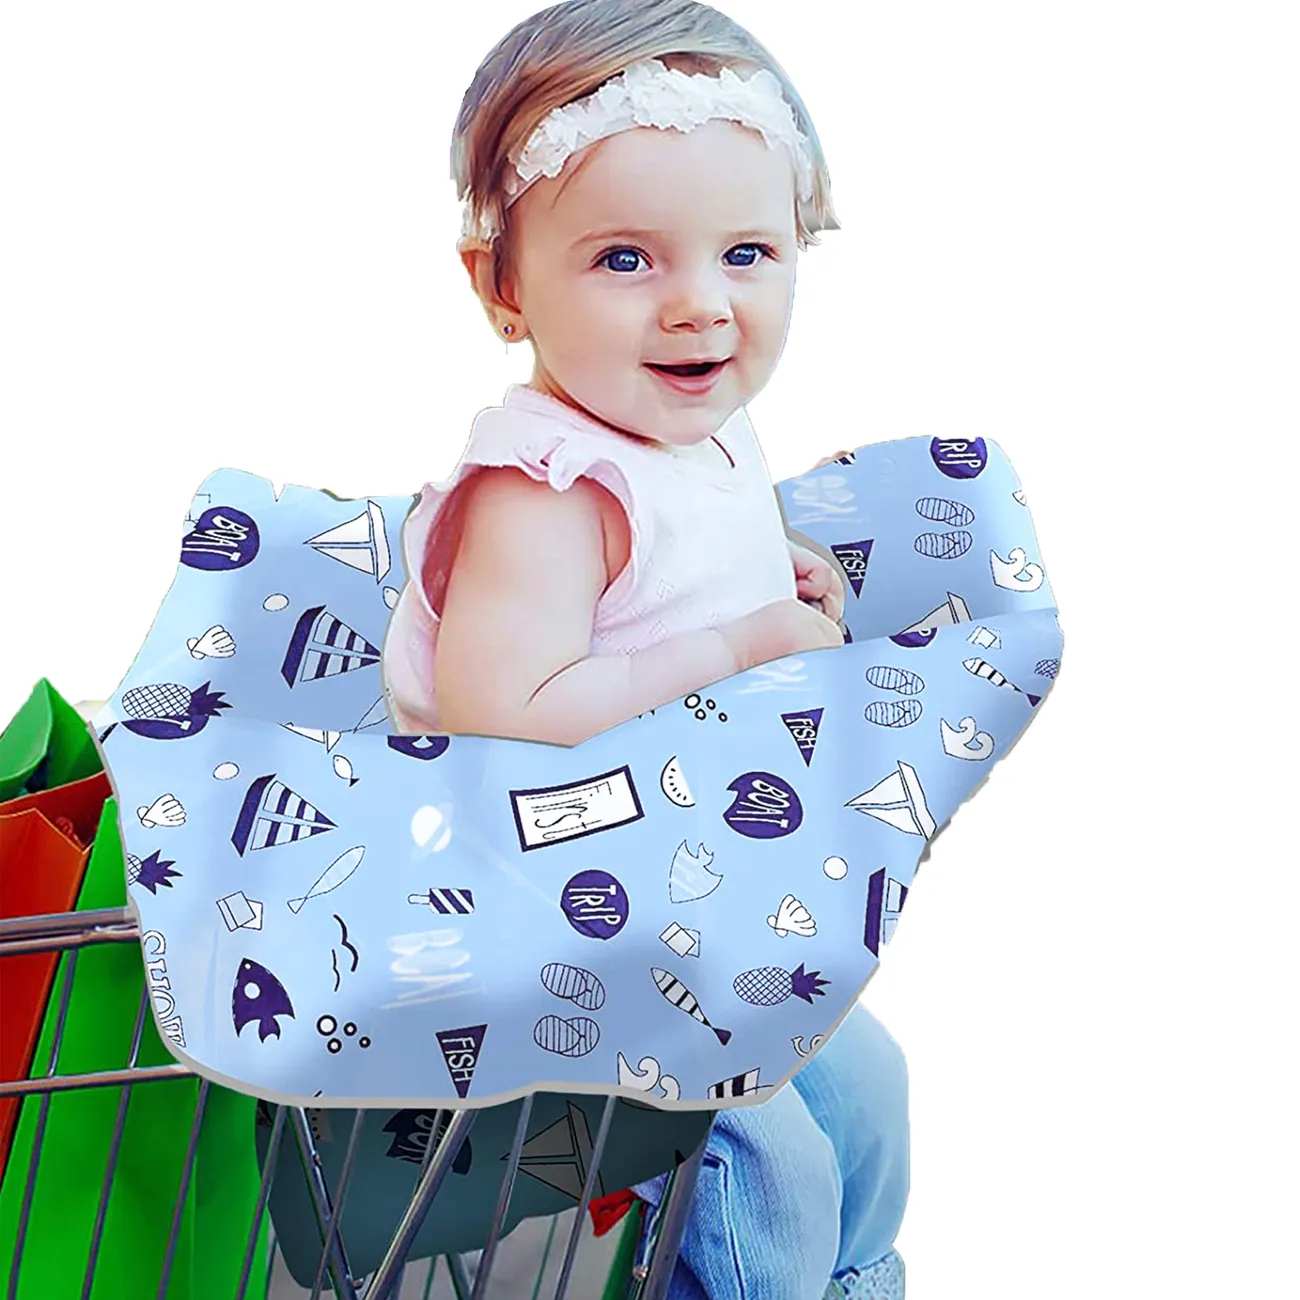 Shopping Cart Cover for Baby, High Chair Cover, Cart Cover for